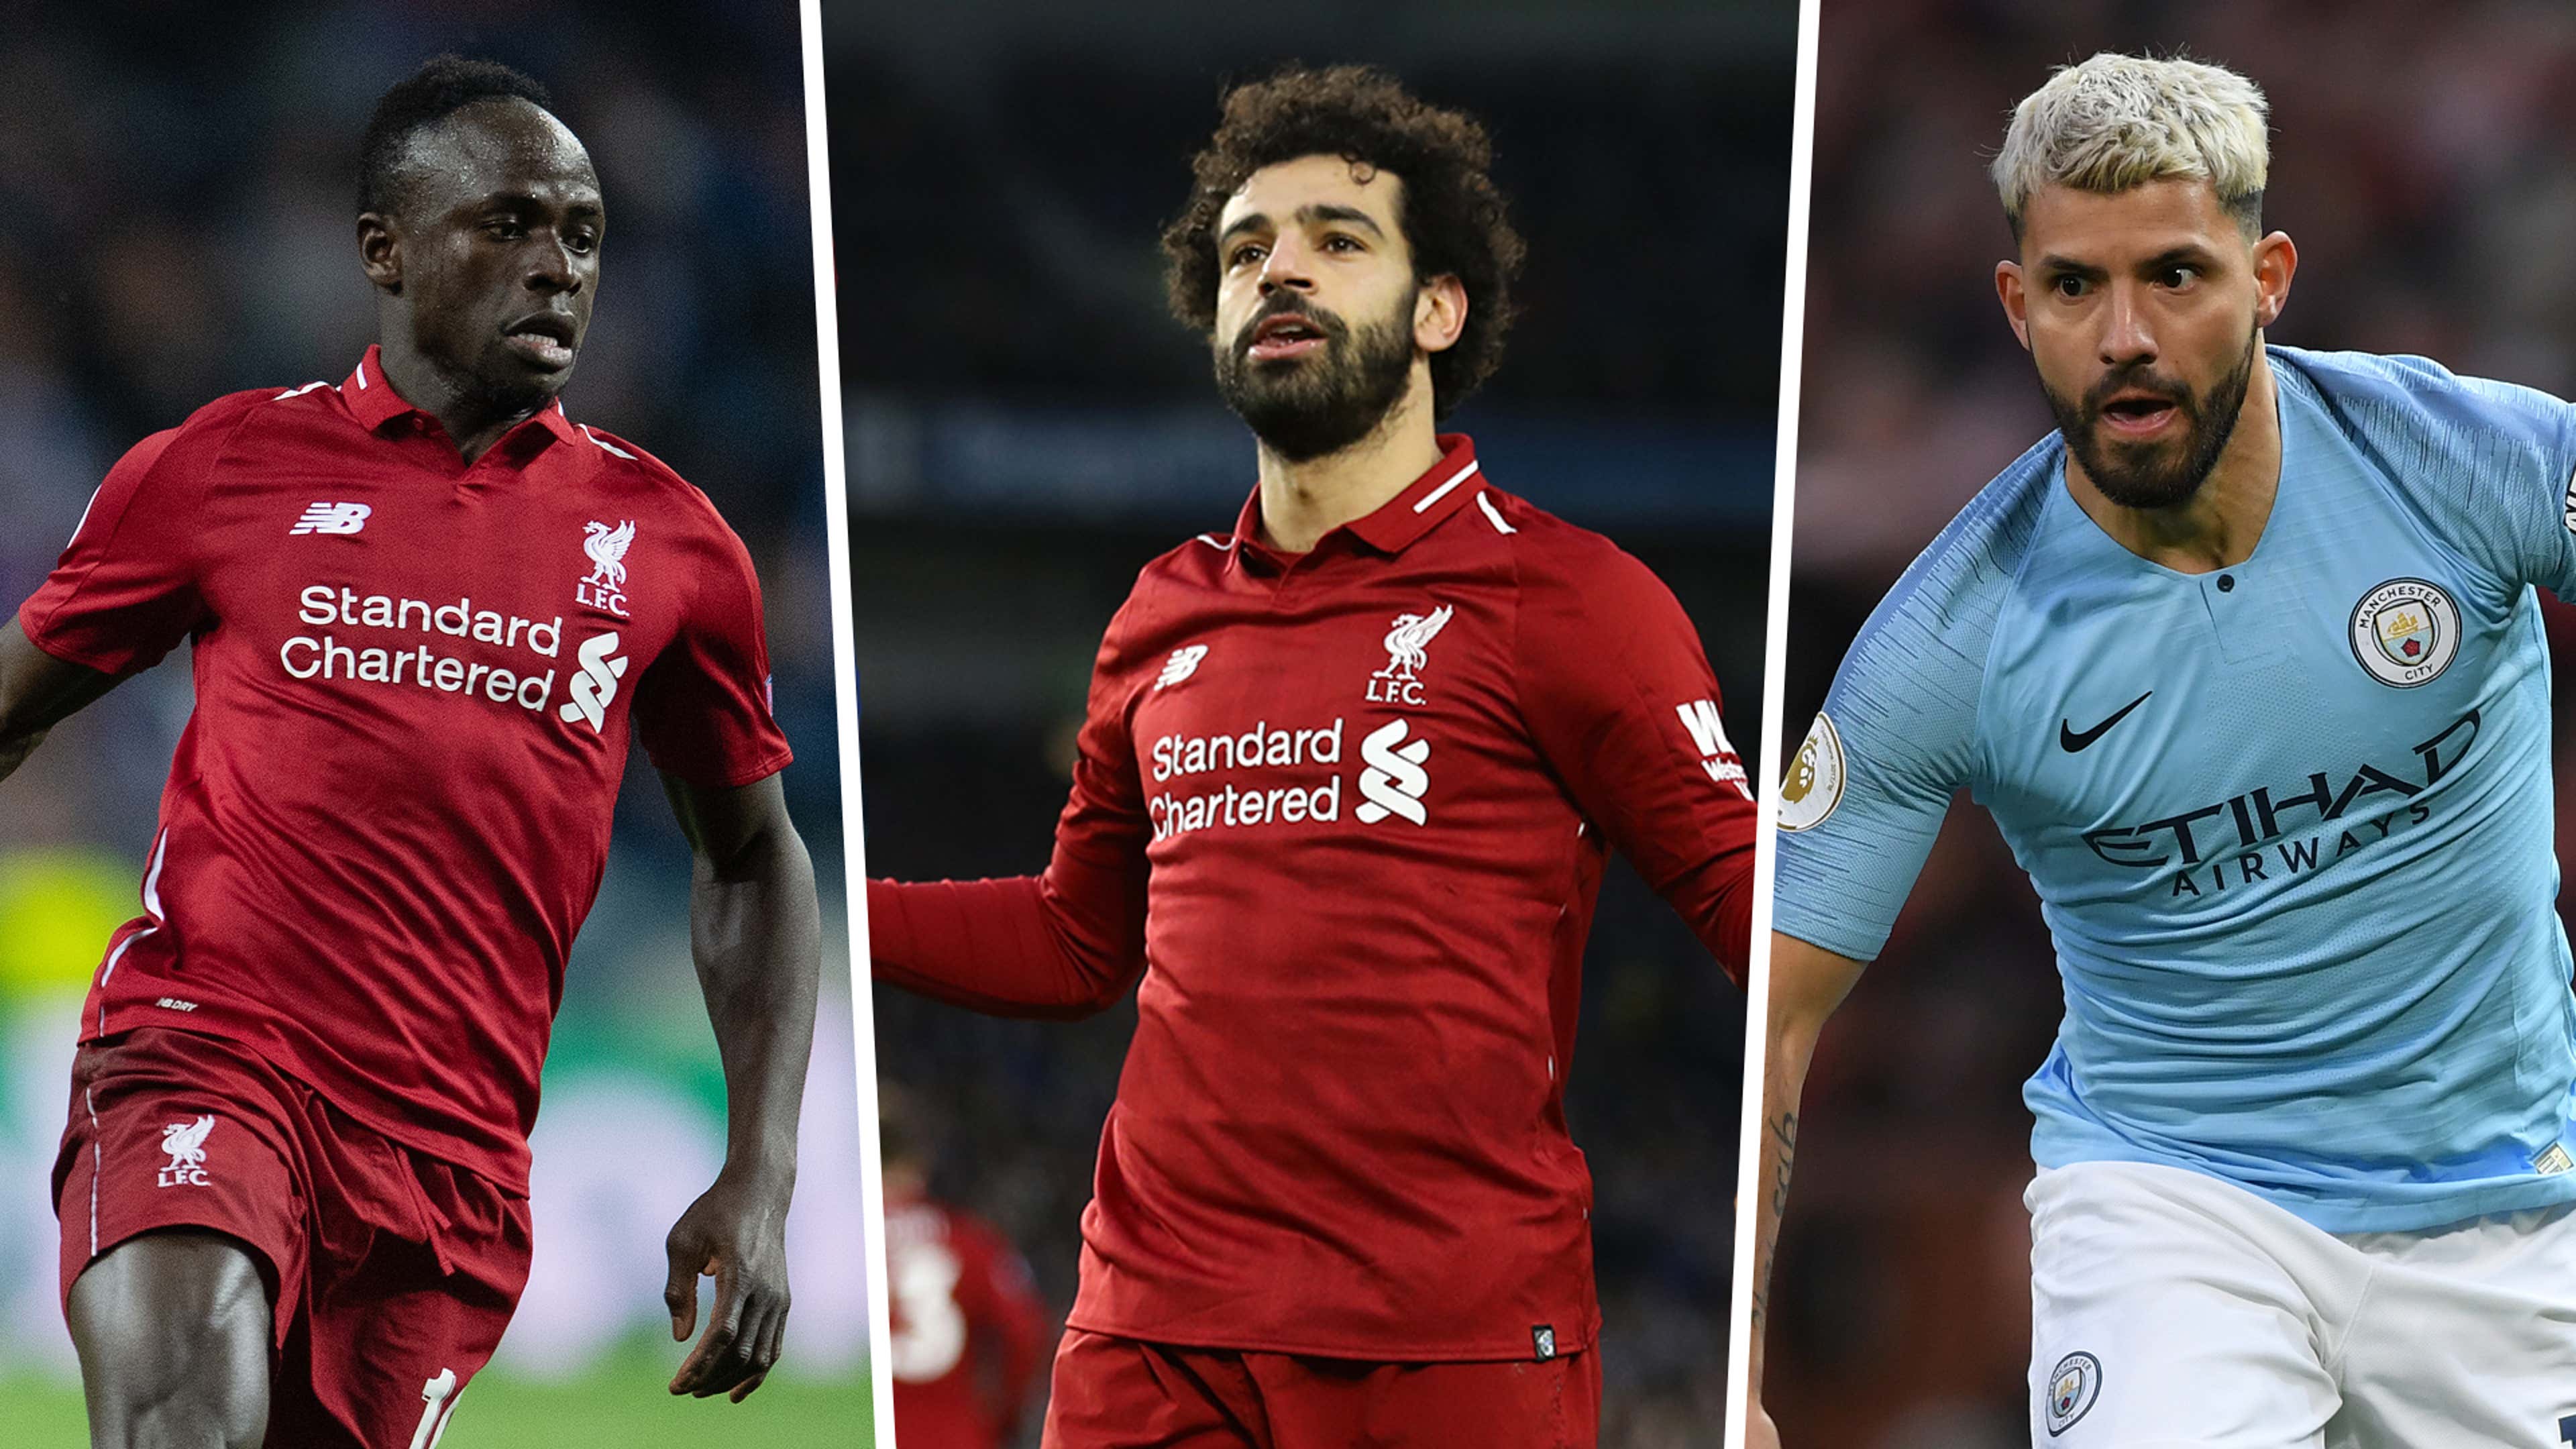 Why the 2018/19 Premier League season is the best ever and the